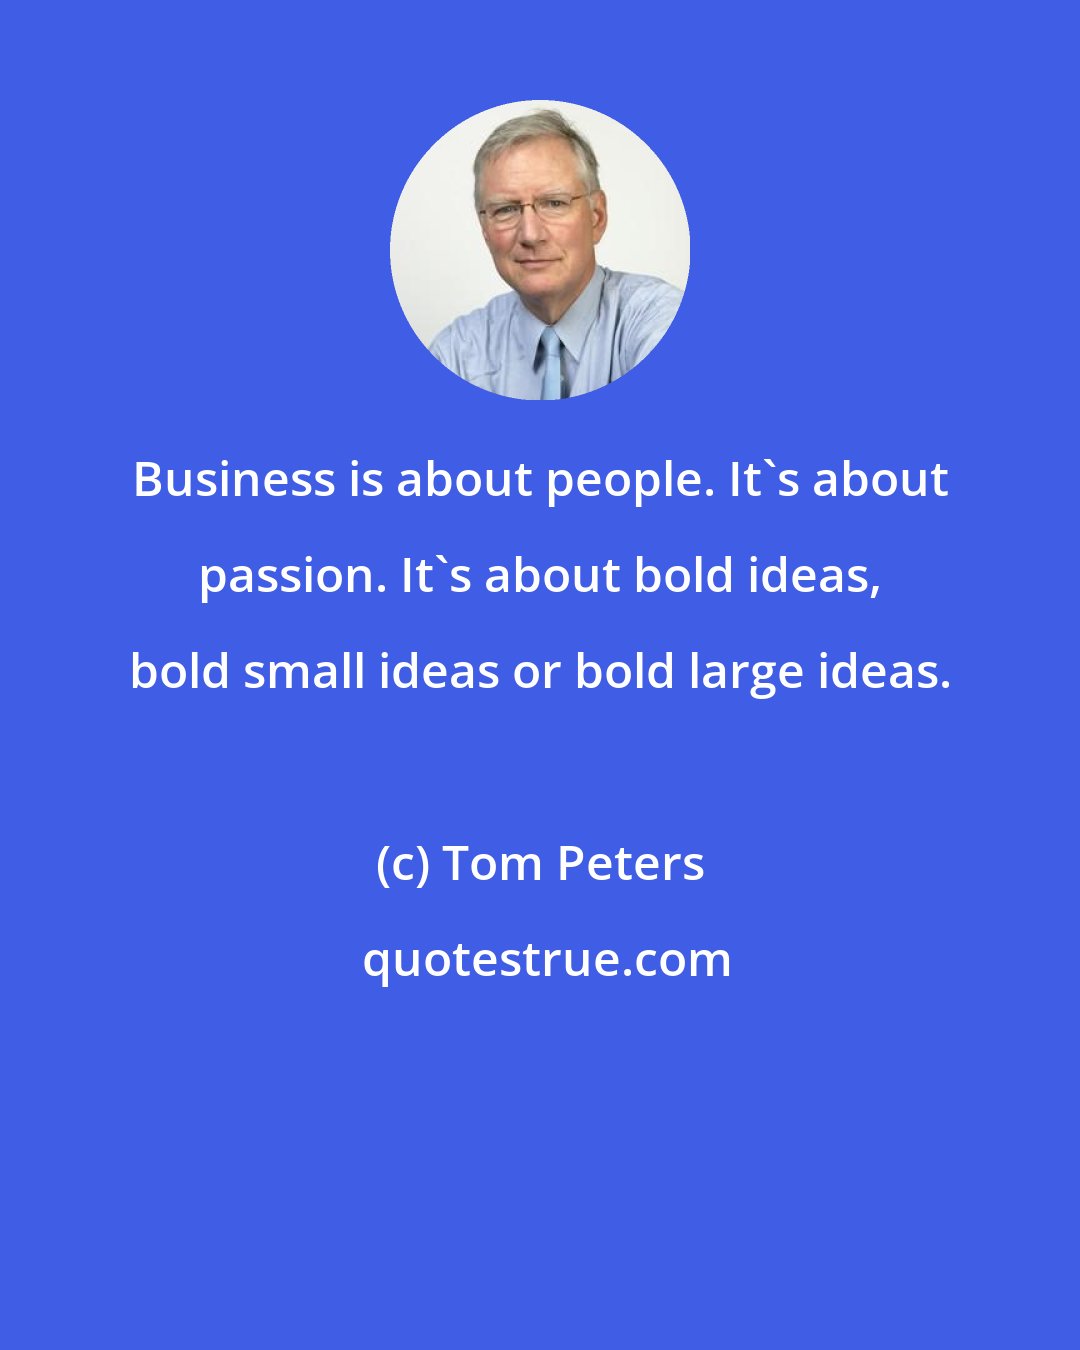 Tom Peters: Business is about people. It's about passion. It's about bold ideas, bold small ideas or bold large ideas.